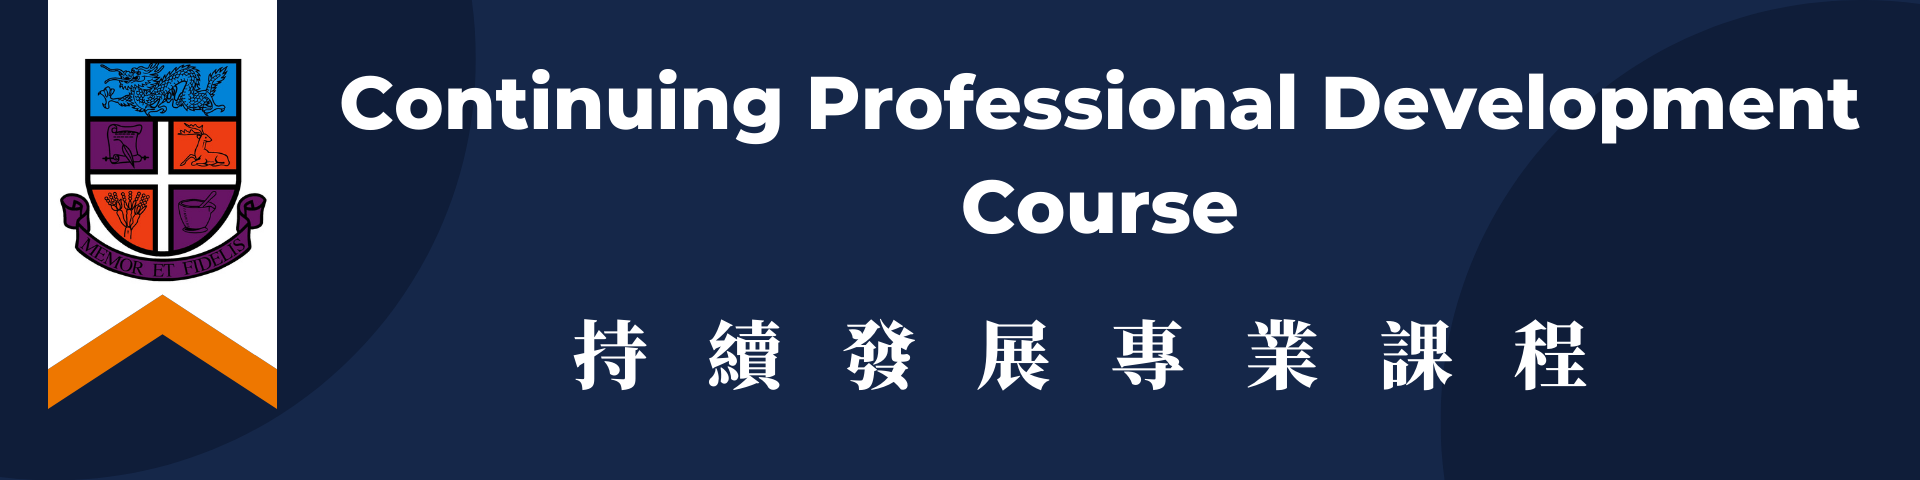 CPD course